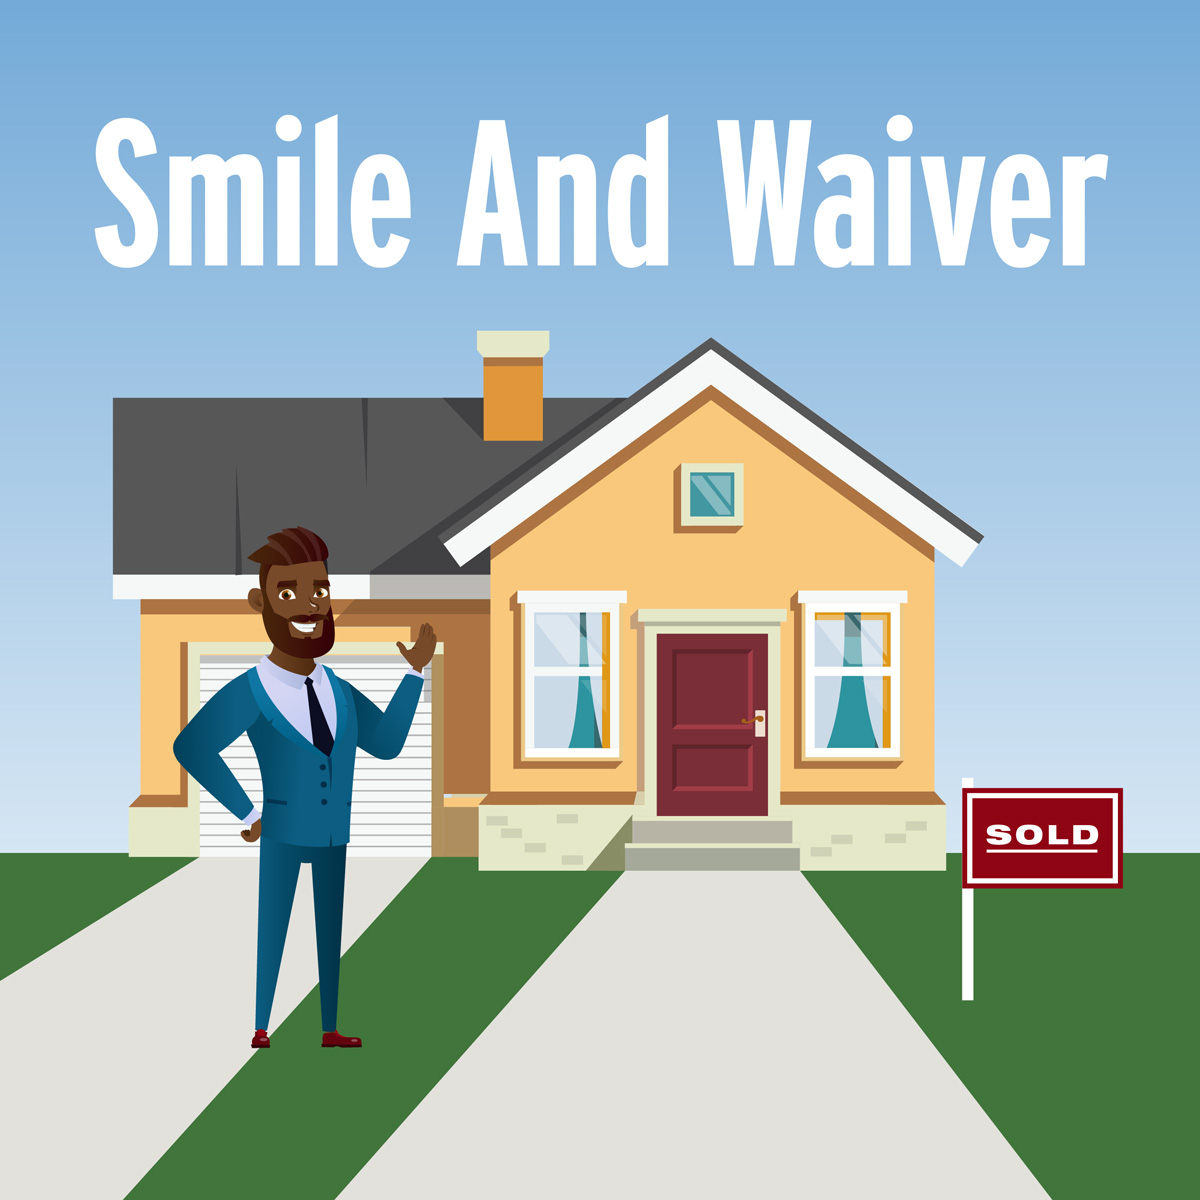 You may be eligible for an appraisal waiver on the purchase of your new home. Call me to find out how much money and time I can save you.
#newpurchase#homeloans#greatrates#fastclose#greatservice